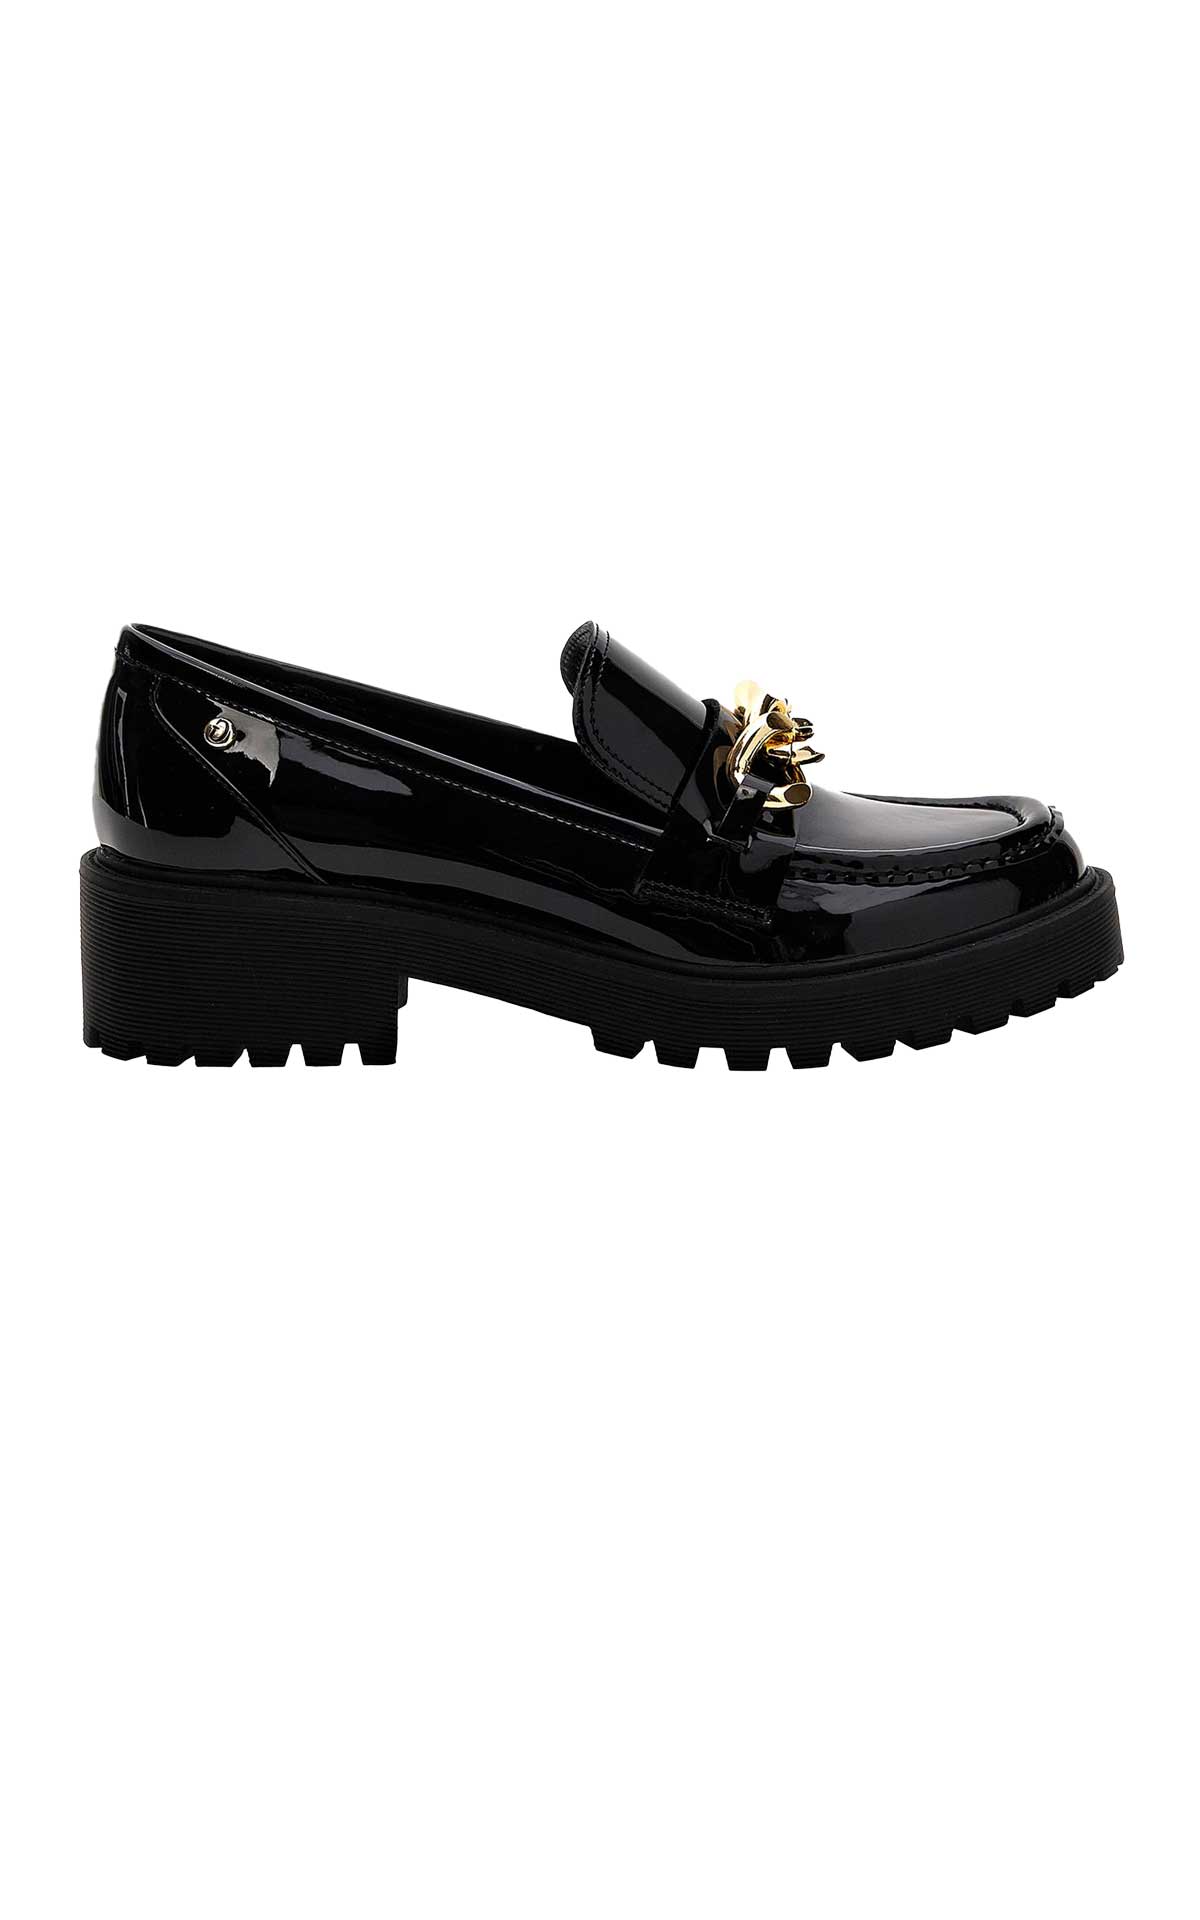 Black patent leather heeled loafers Guess